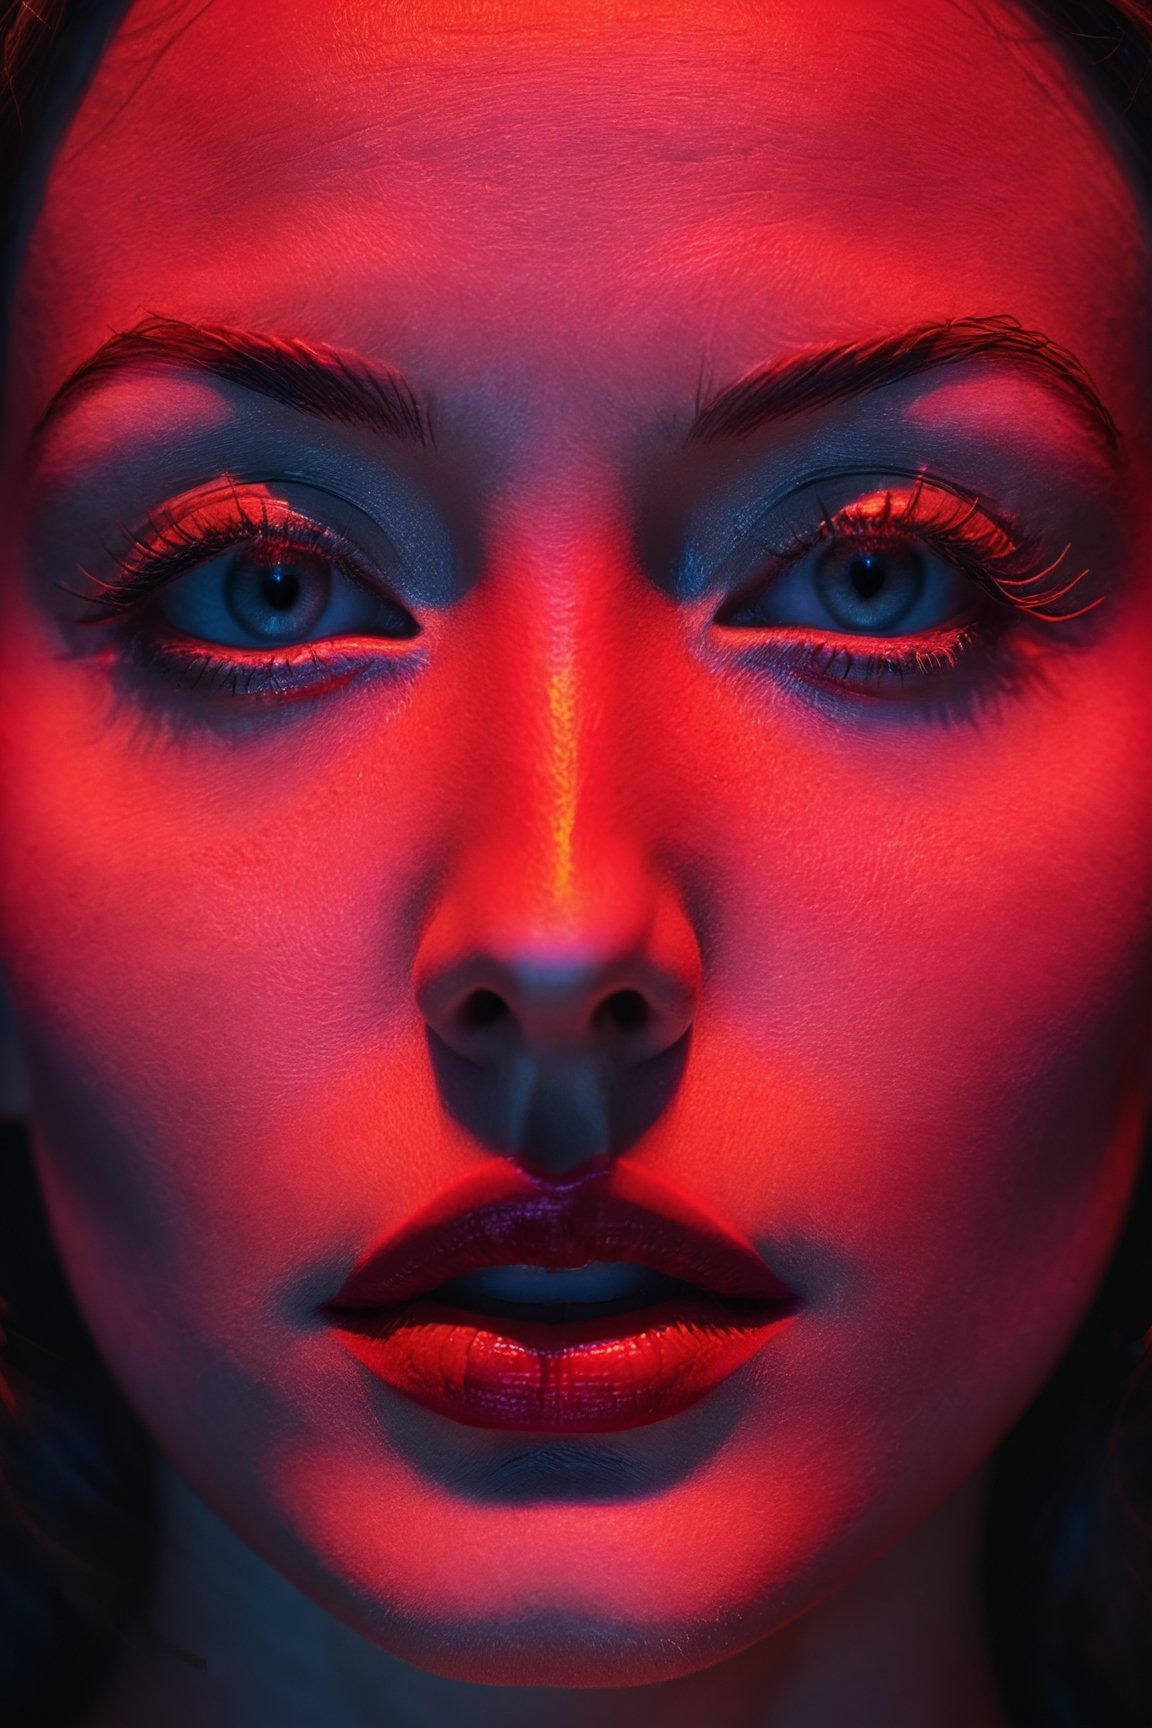 A woman's face in close-up, lit by intense red neon light outlining her fierce, enigmatic features with a focus on her eyes or lips